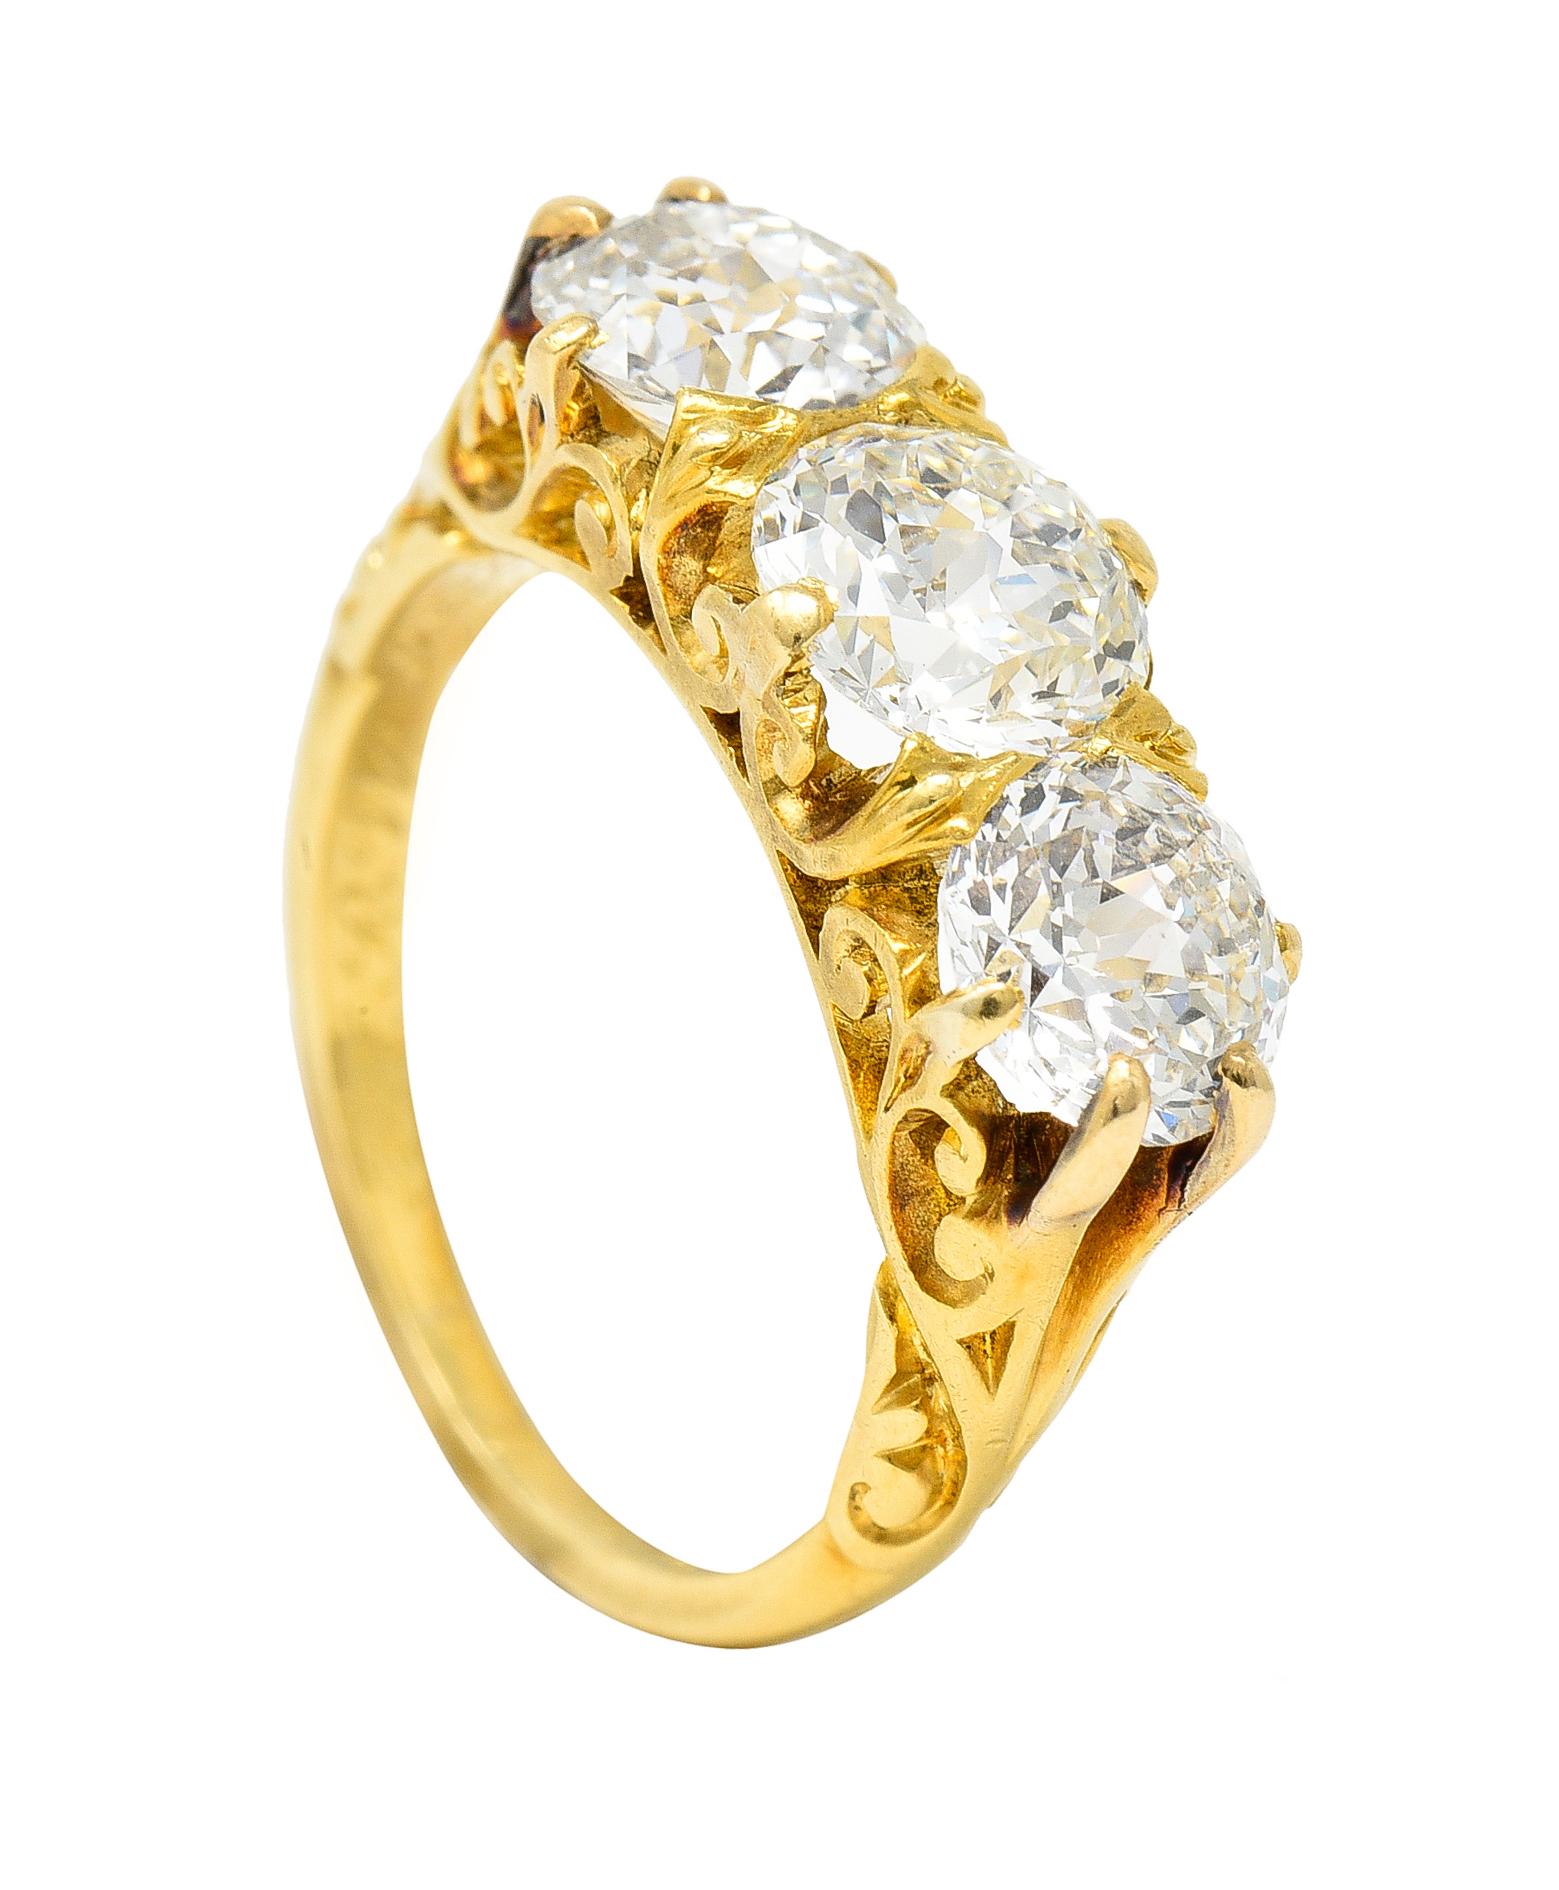 T.B. Starr Victorian 2.64 Carat Jubilee Cut Diamond 18K Yellow Gold Antique Ring For Sale 7